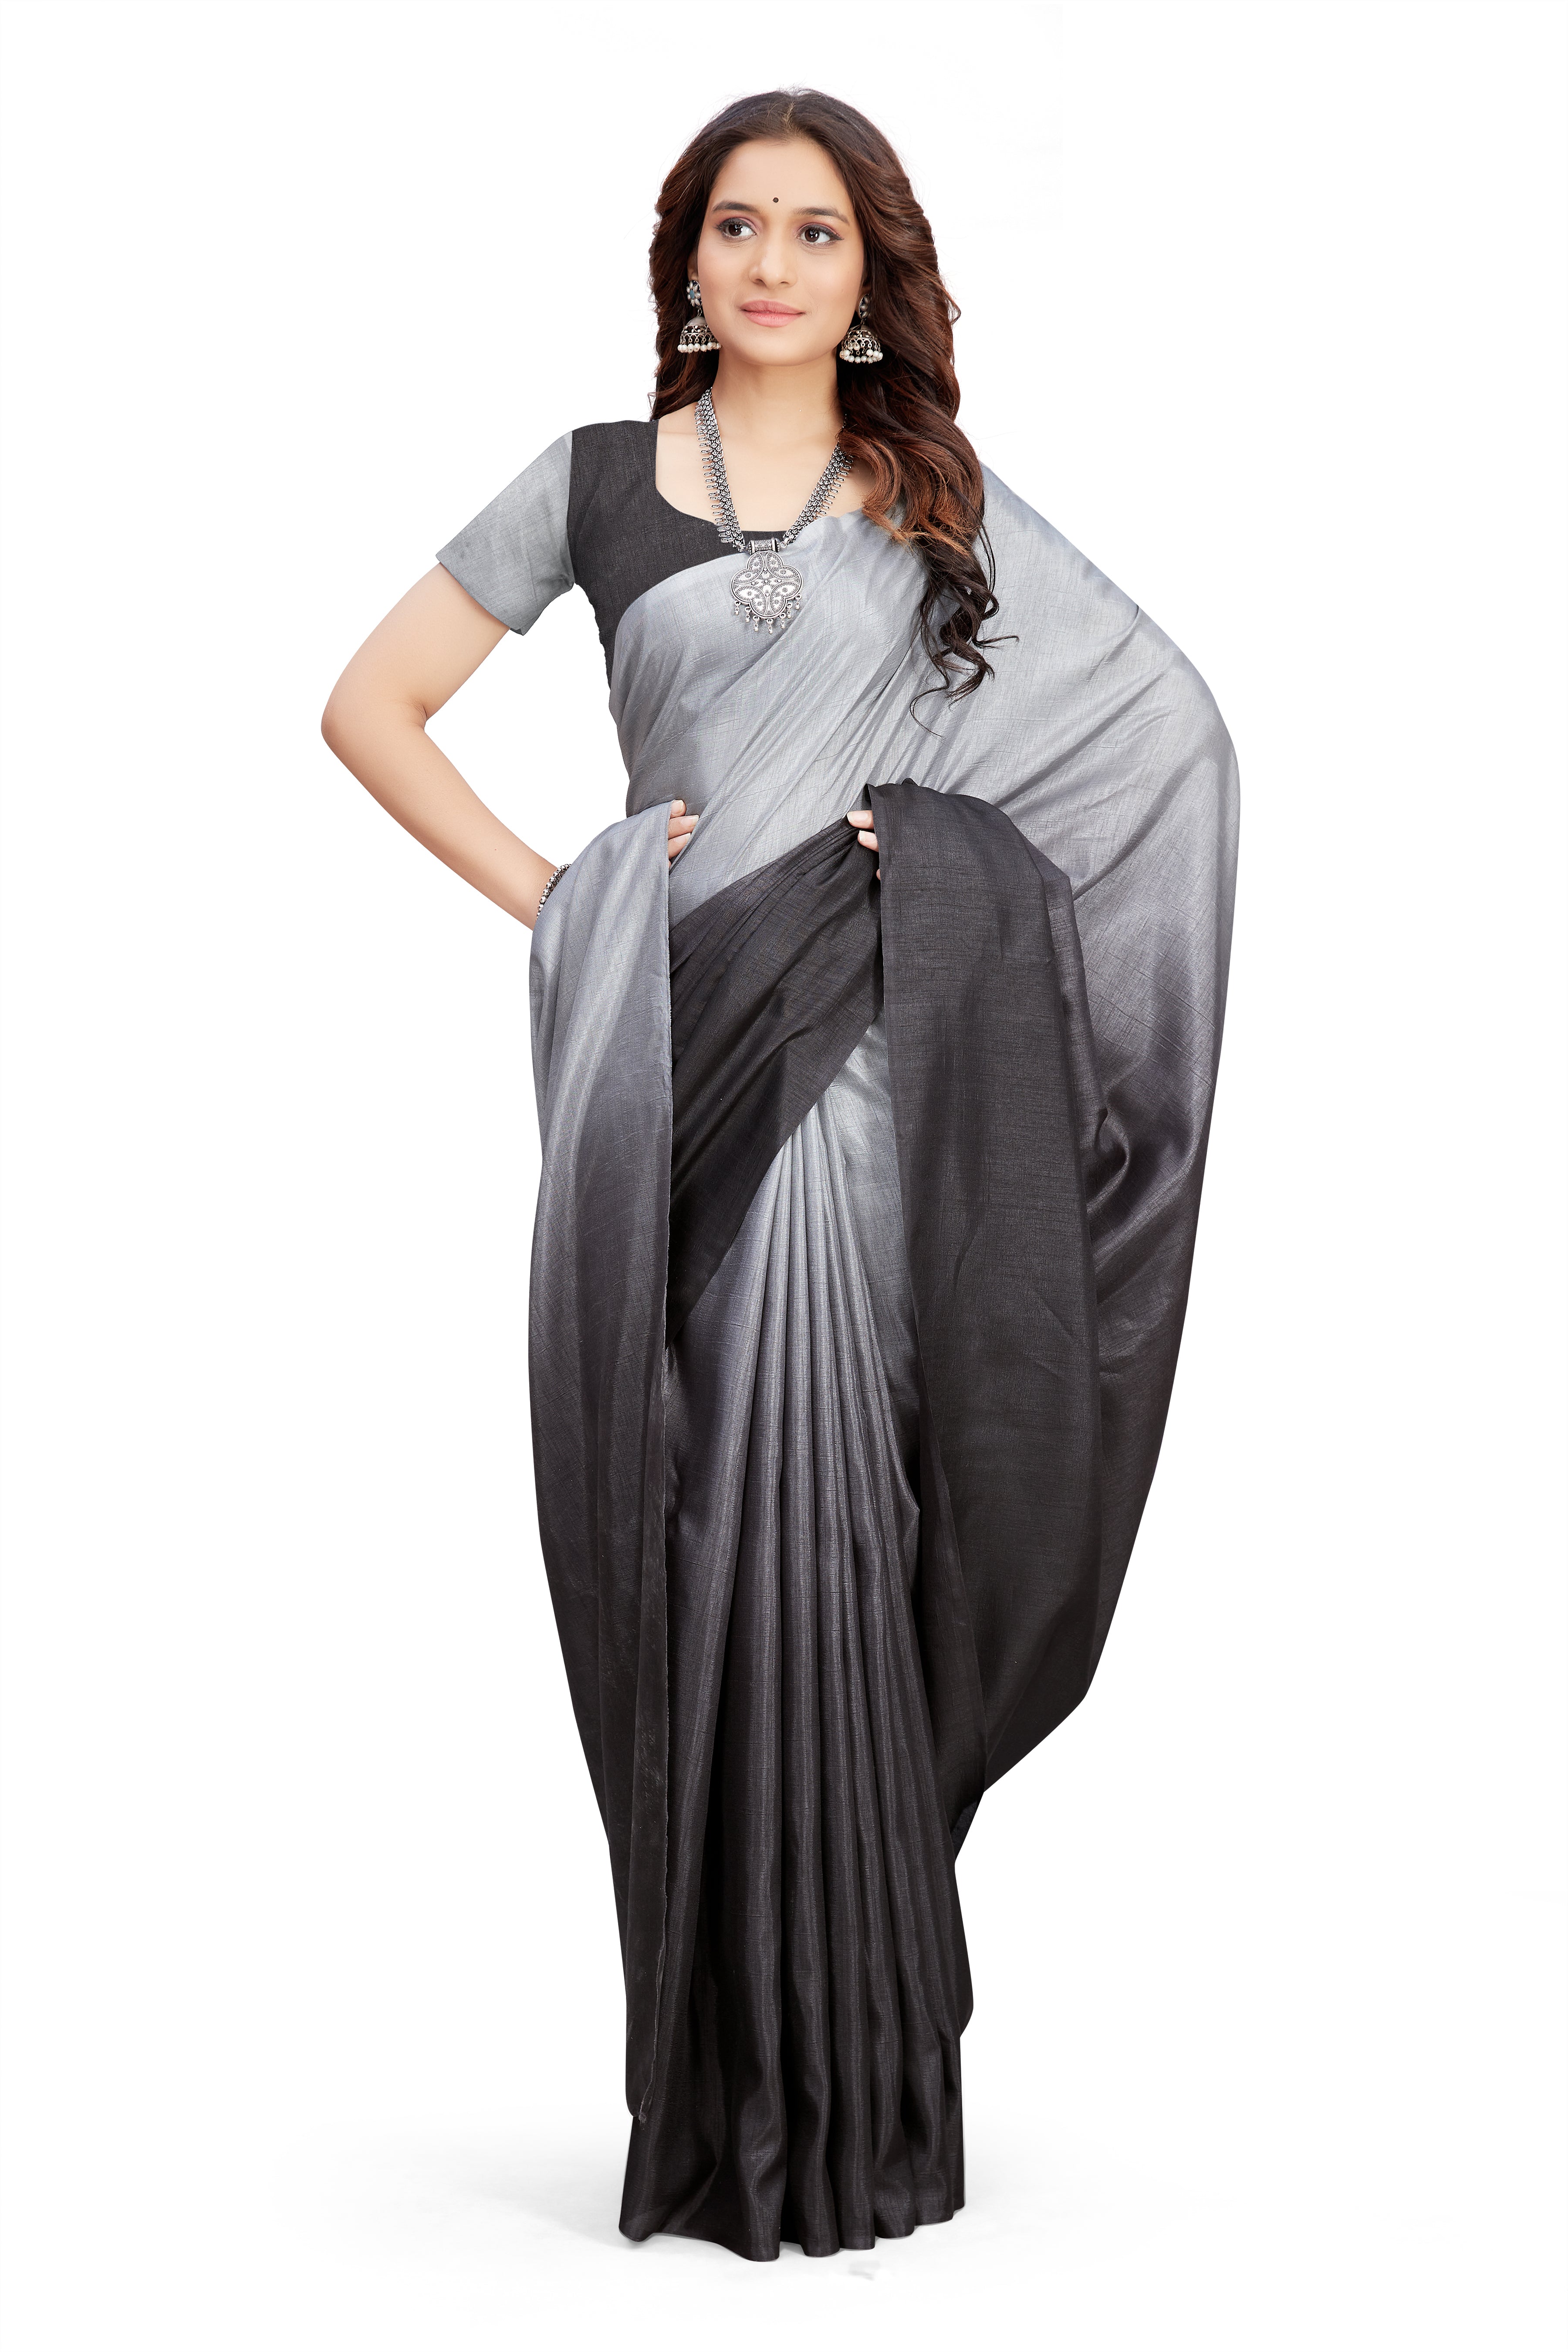 Women's self Woven Solid Textured Dual Shade Festive Wear Silk Blend Sari With Blouse Piece (Grey) - NIMIDHYA